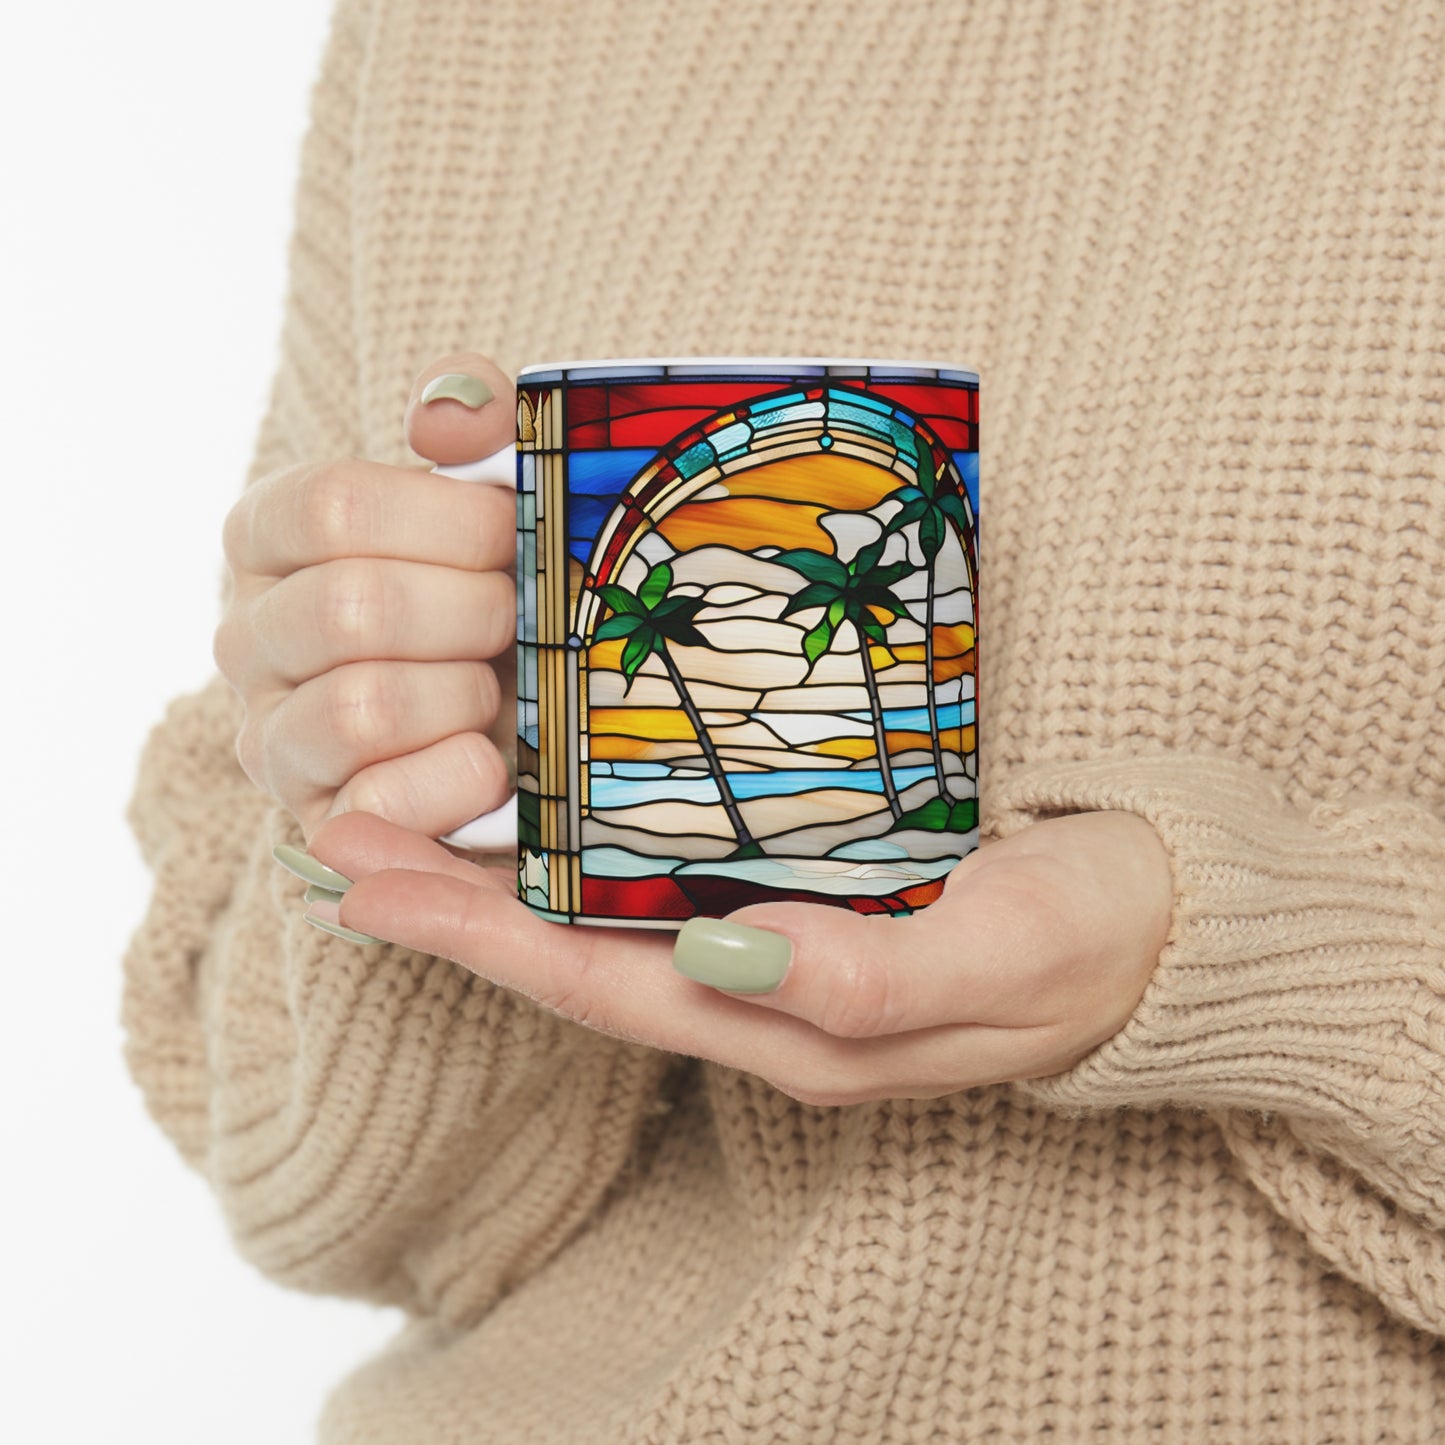 Christmas in Florida Tiffany's Studio Style wide glass print Ceramic Mug by ViralDestinations - Collectible Art at your hands